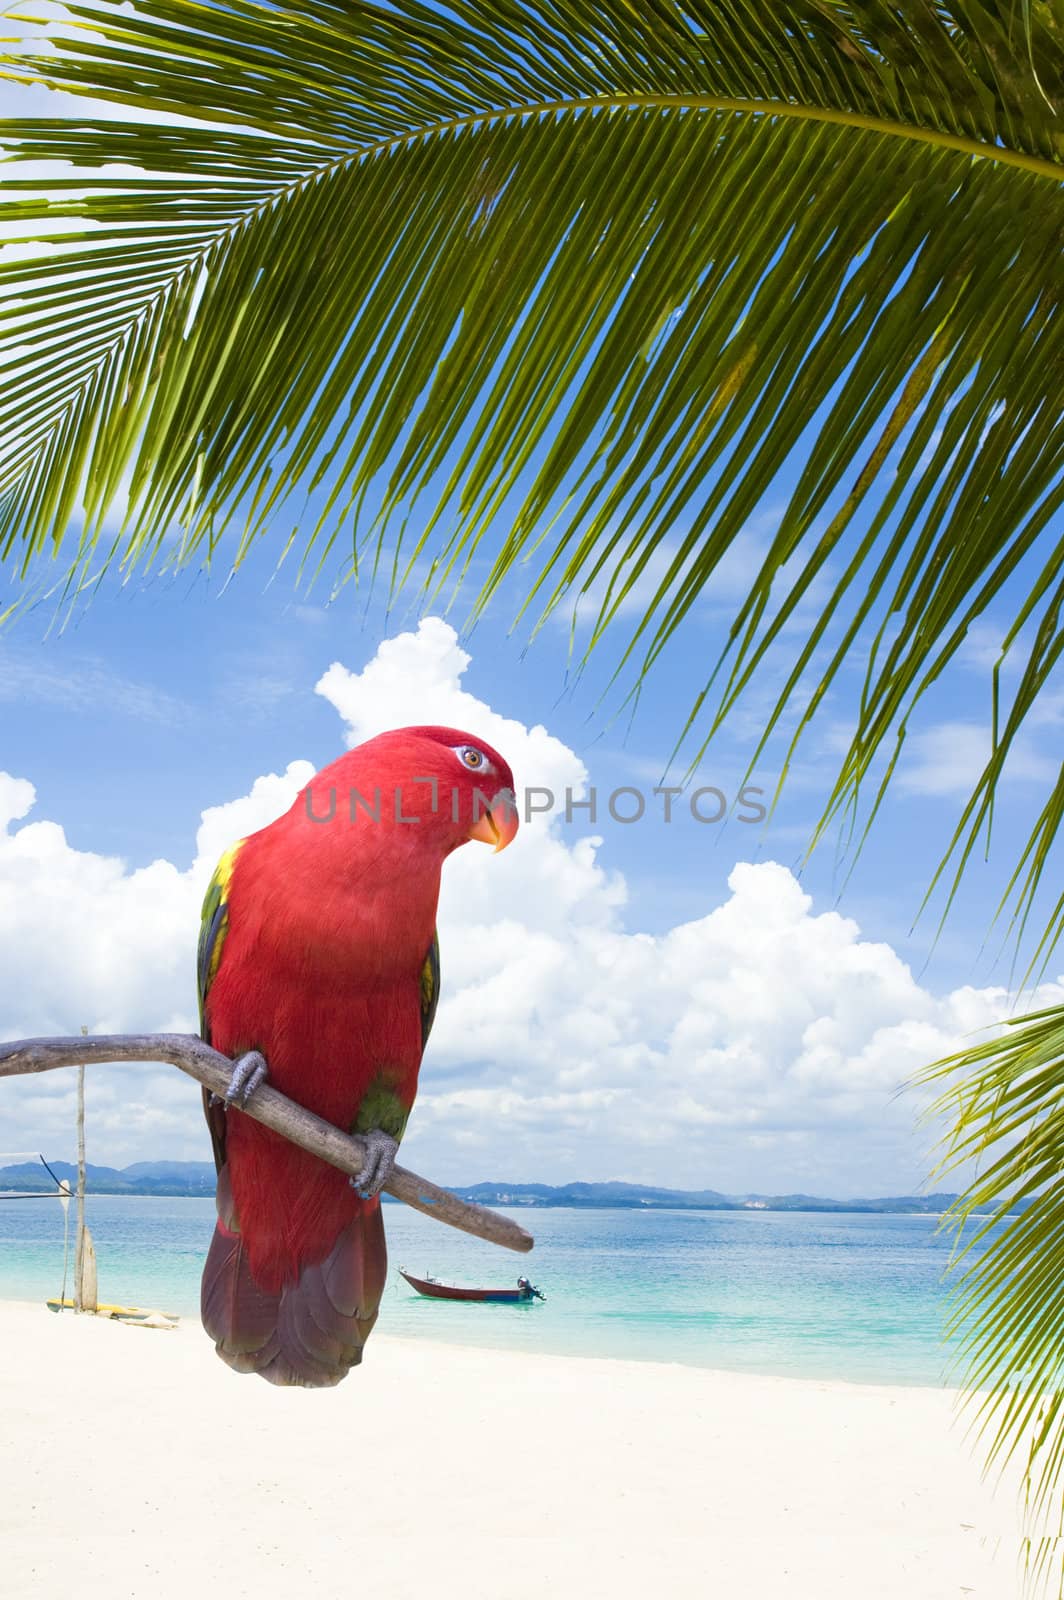 parrot on a beach by yuliang11